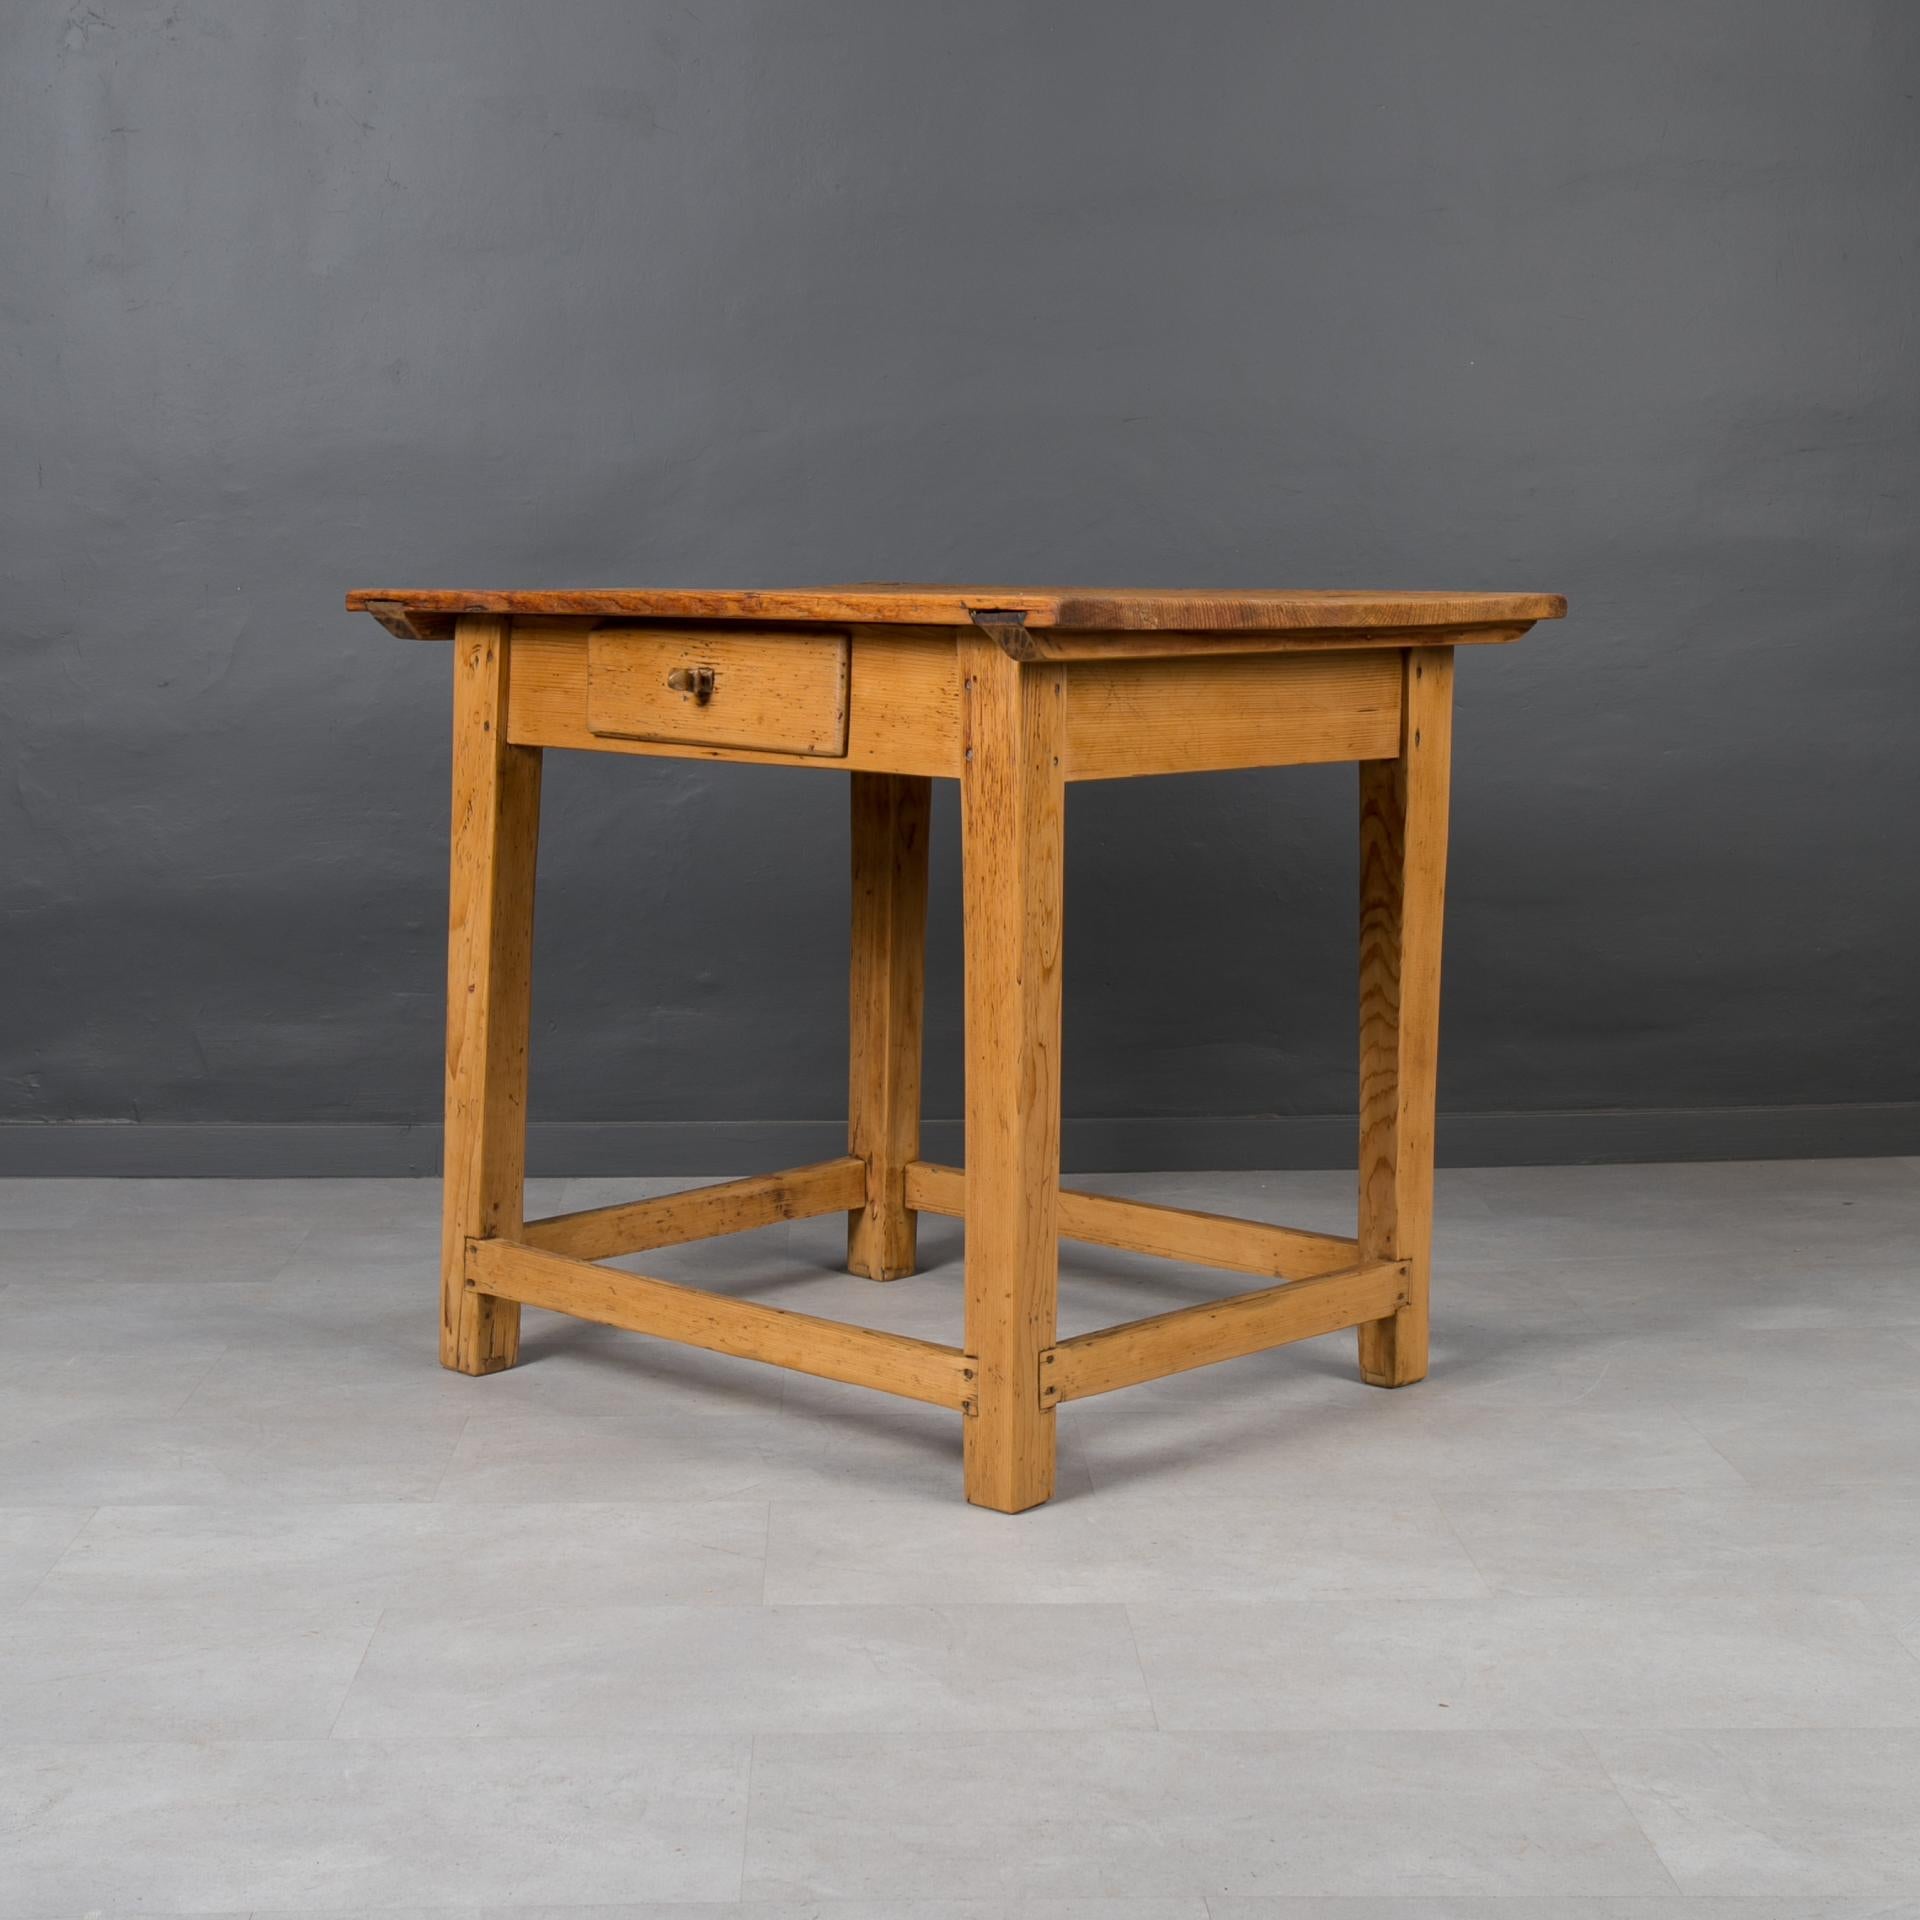 Vintage Pine Wood Table, Rustic Style, Prep or Dining Table, Kitchen Island In Good Condition For Sale In Wrocław, Poland